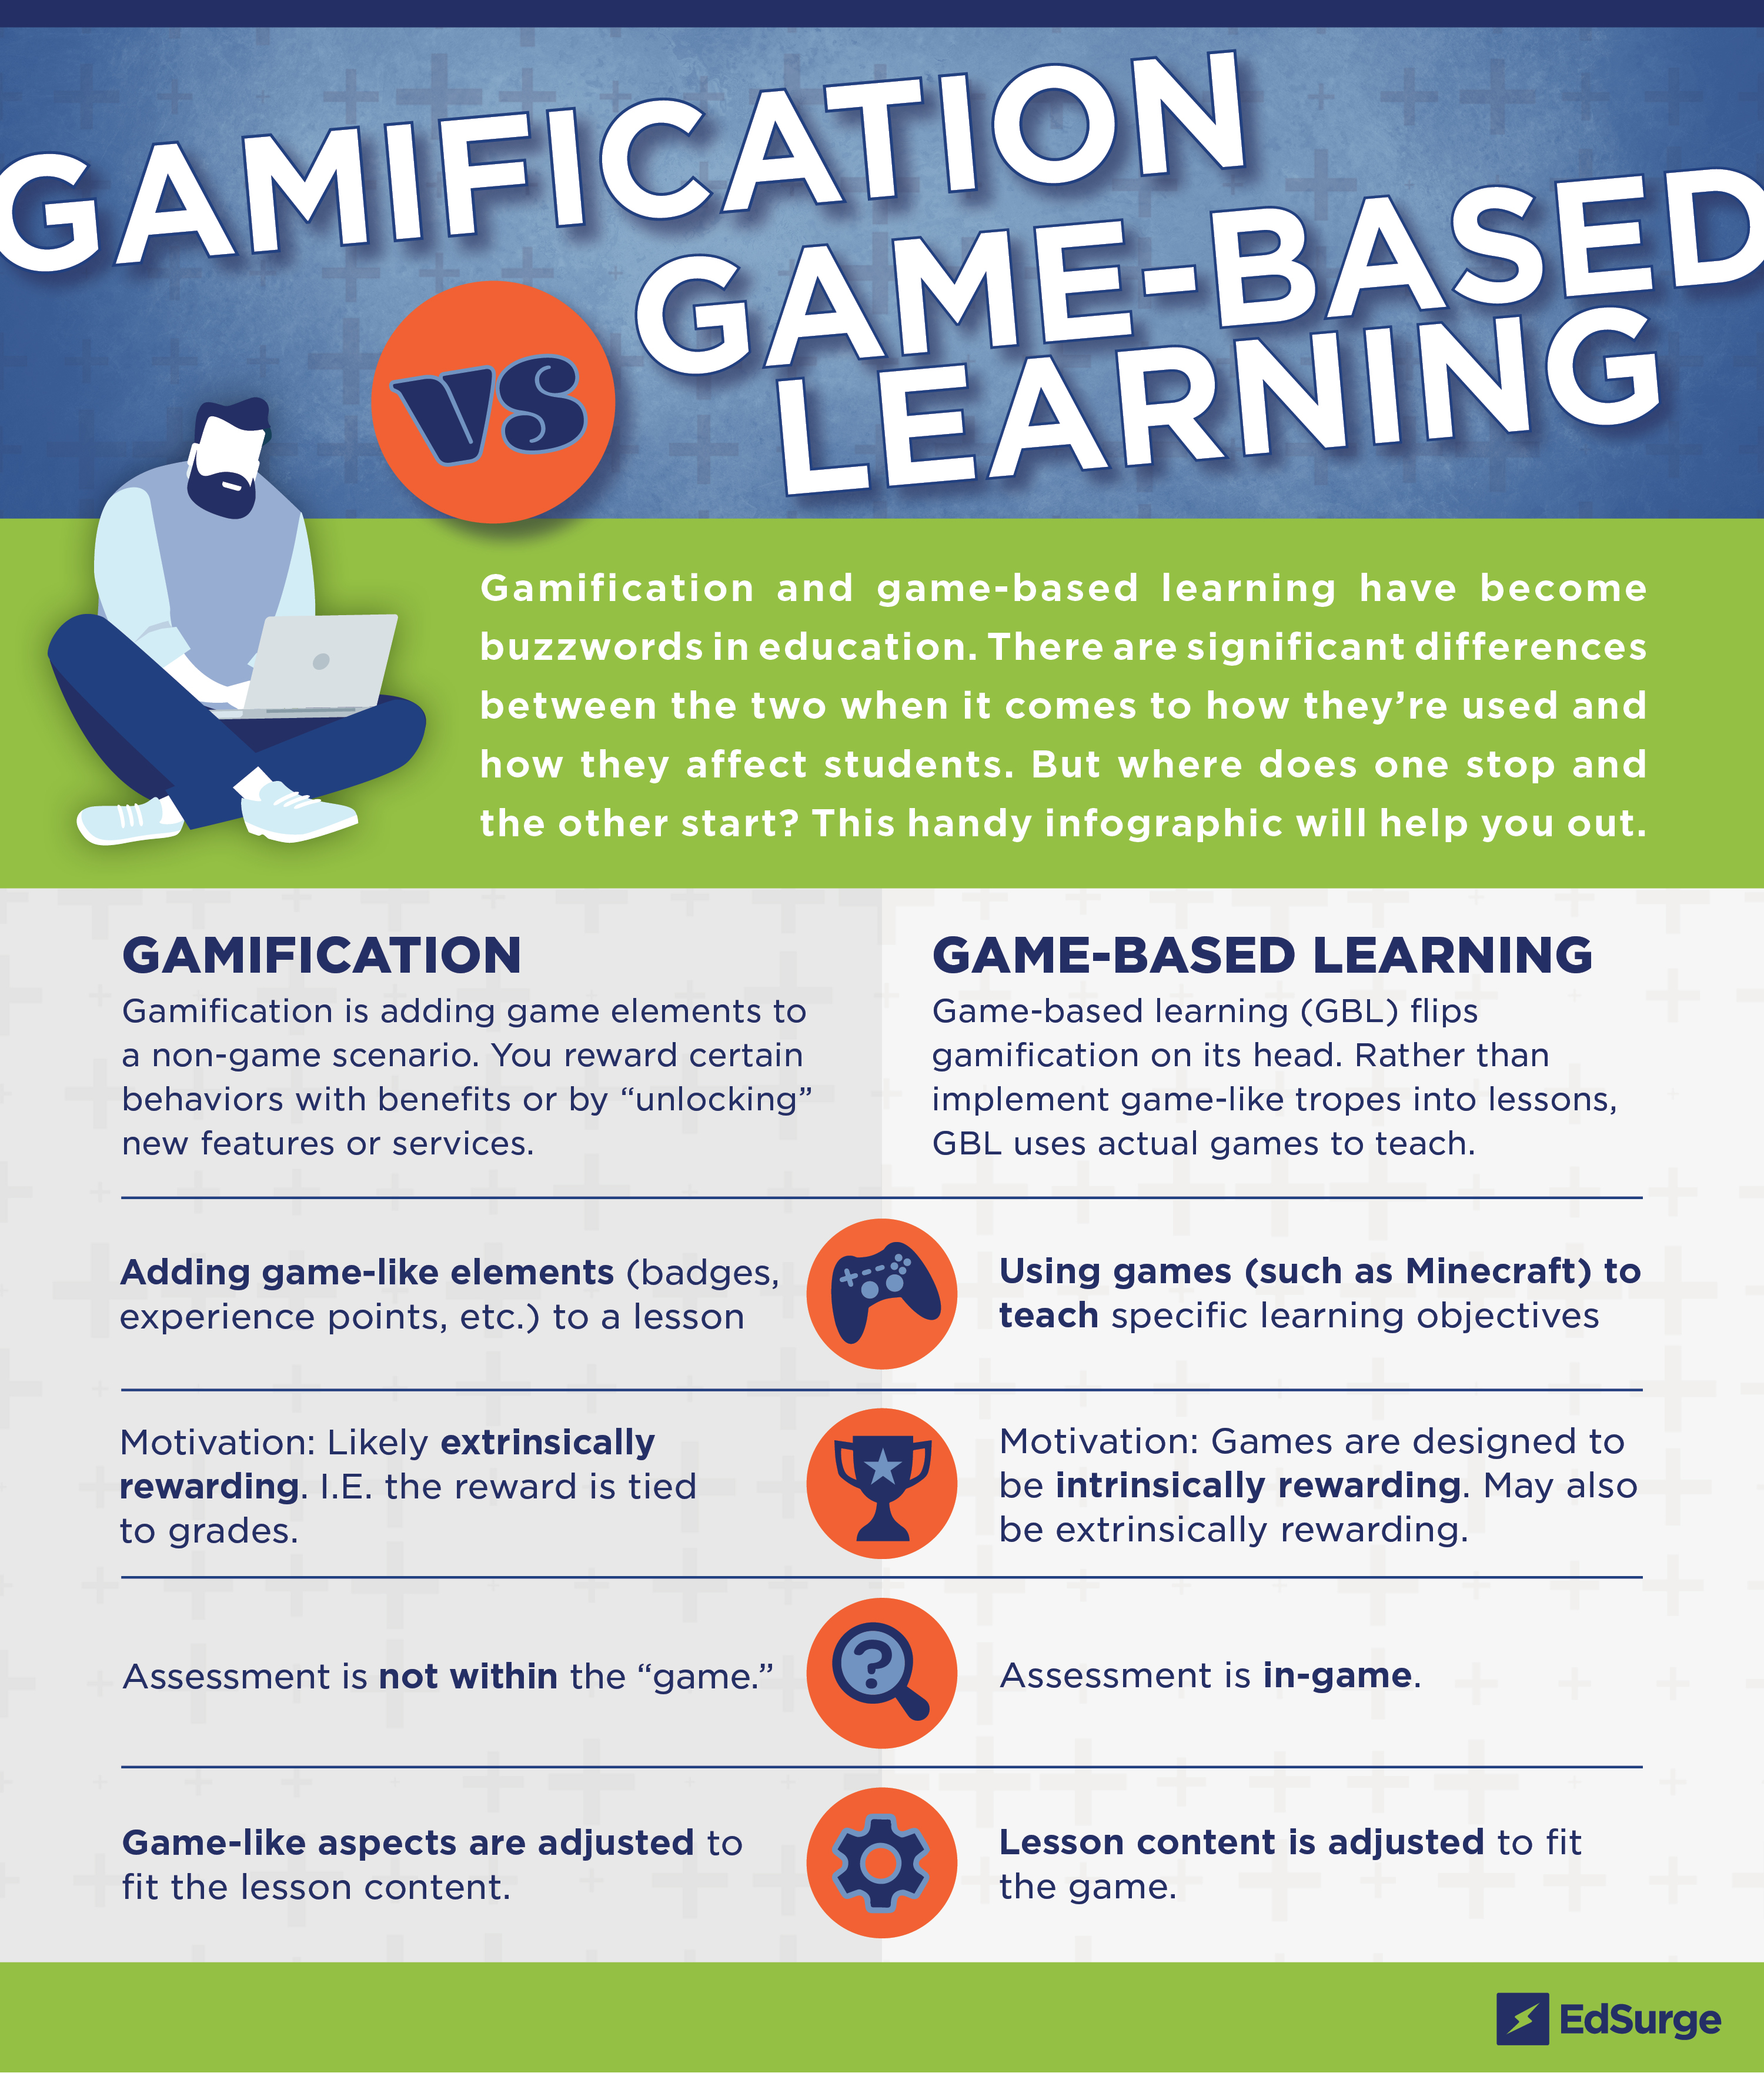 5 Benefits of Online Games in the Classroom 